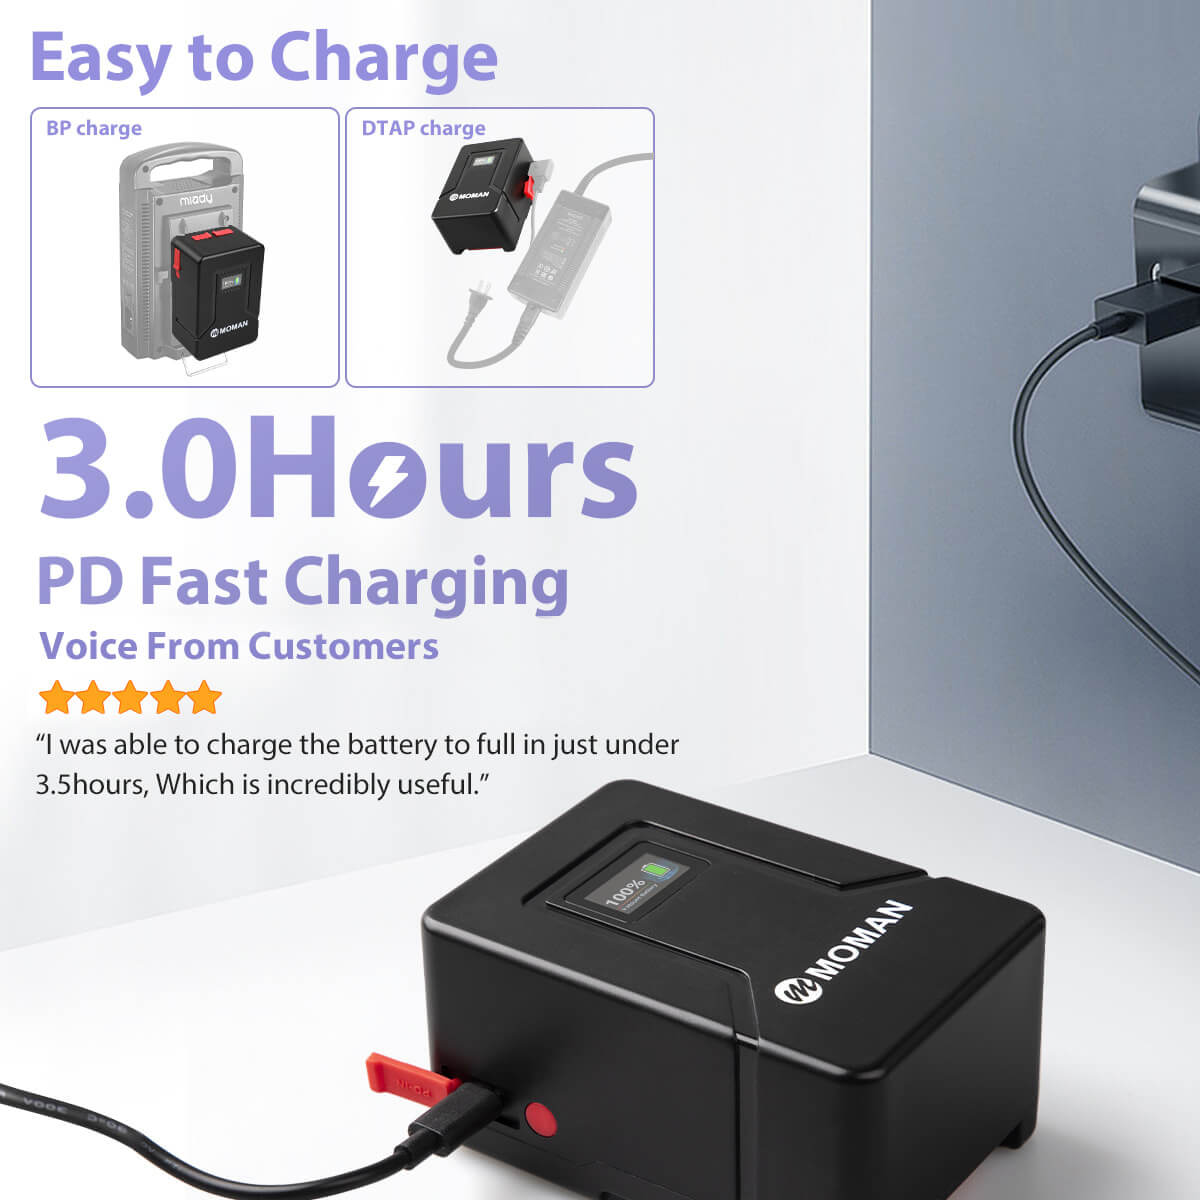 Moman Power 99S is easy to charge with BP or D-tap. About 3.5 hours PD fast charging will get it to full charge